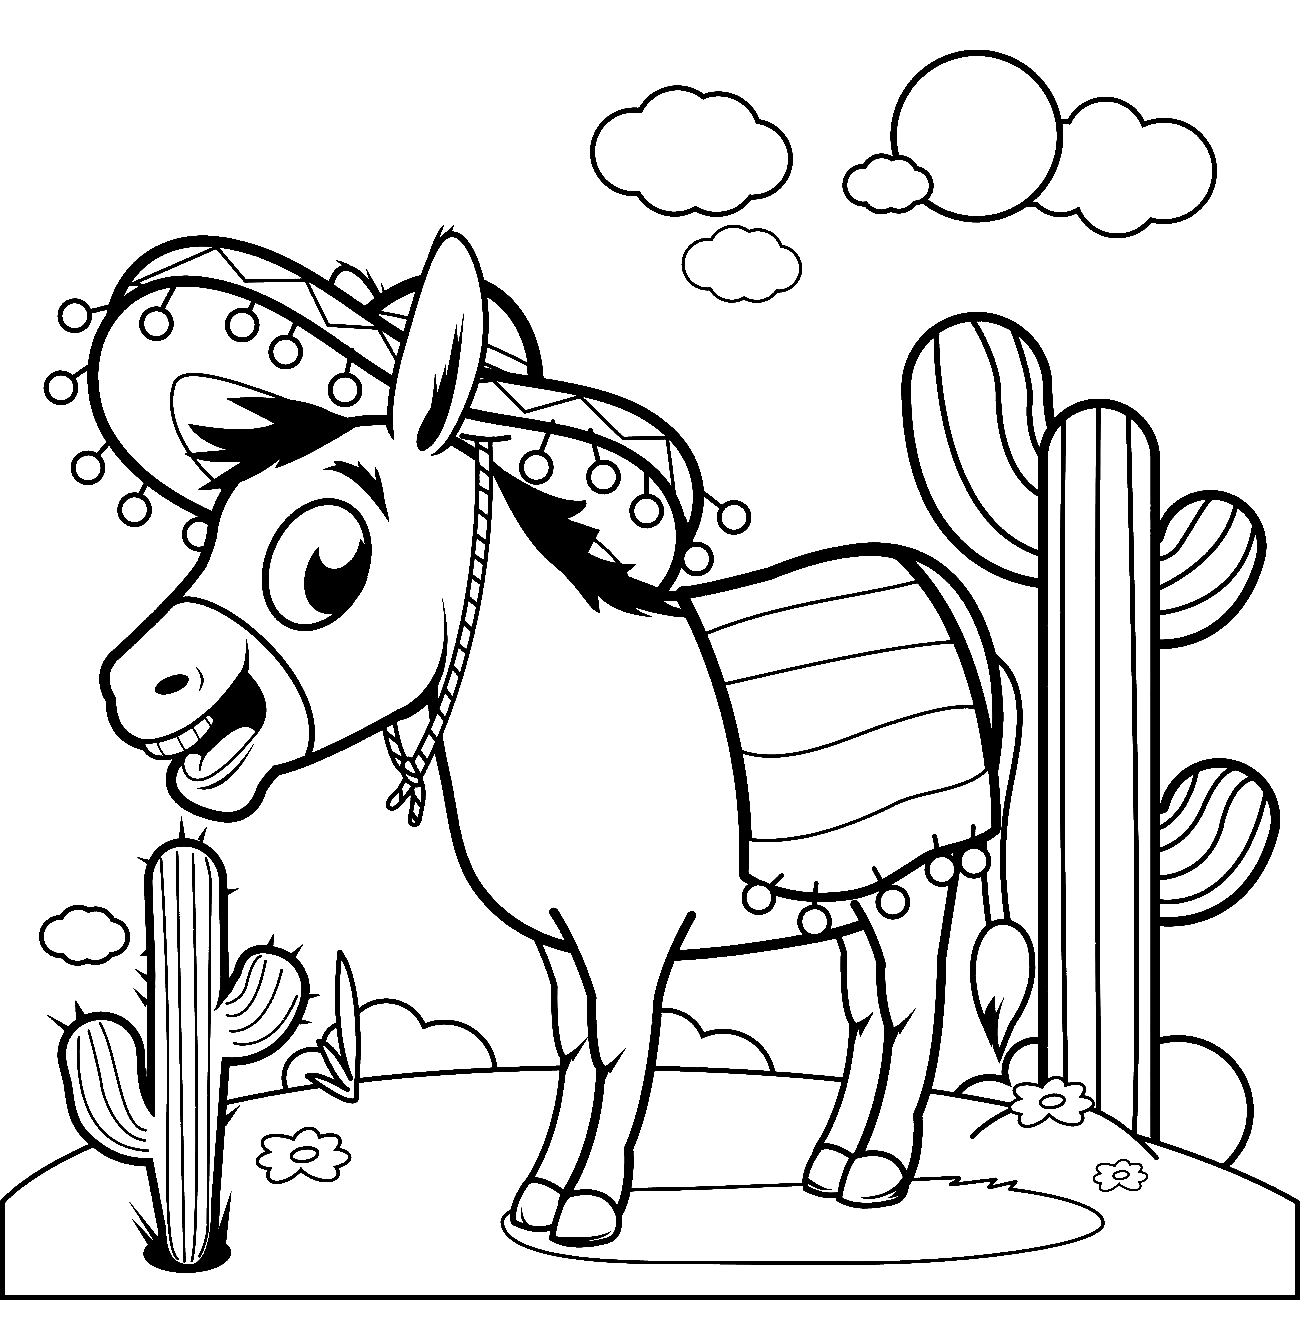 Mexican Donkey Coloring Page